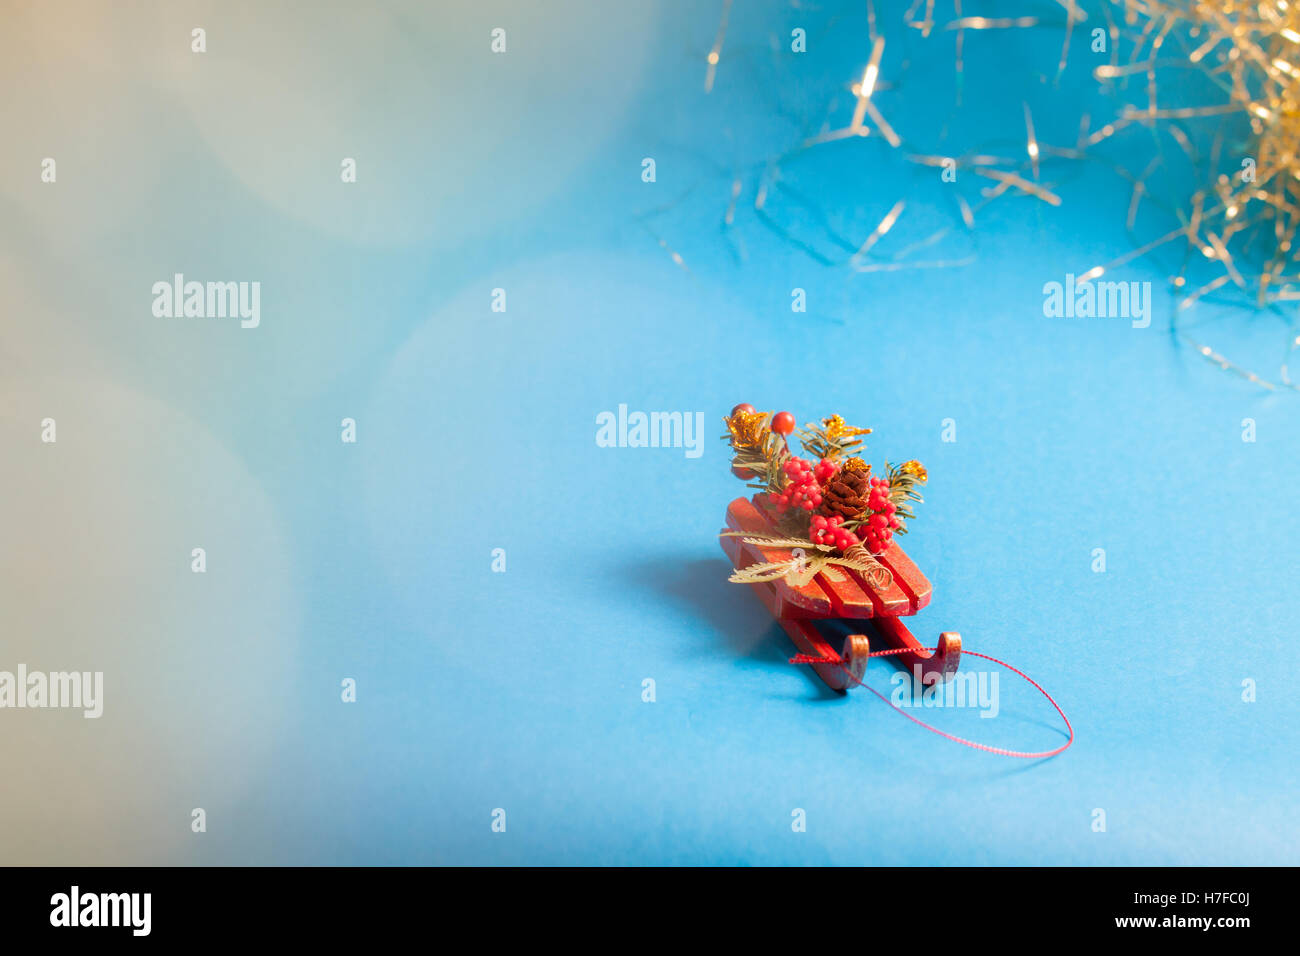 Christmas card with decorative sled standing on blue background in blurred glow balls. Stock Photo